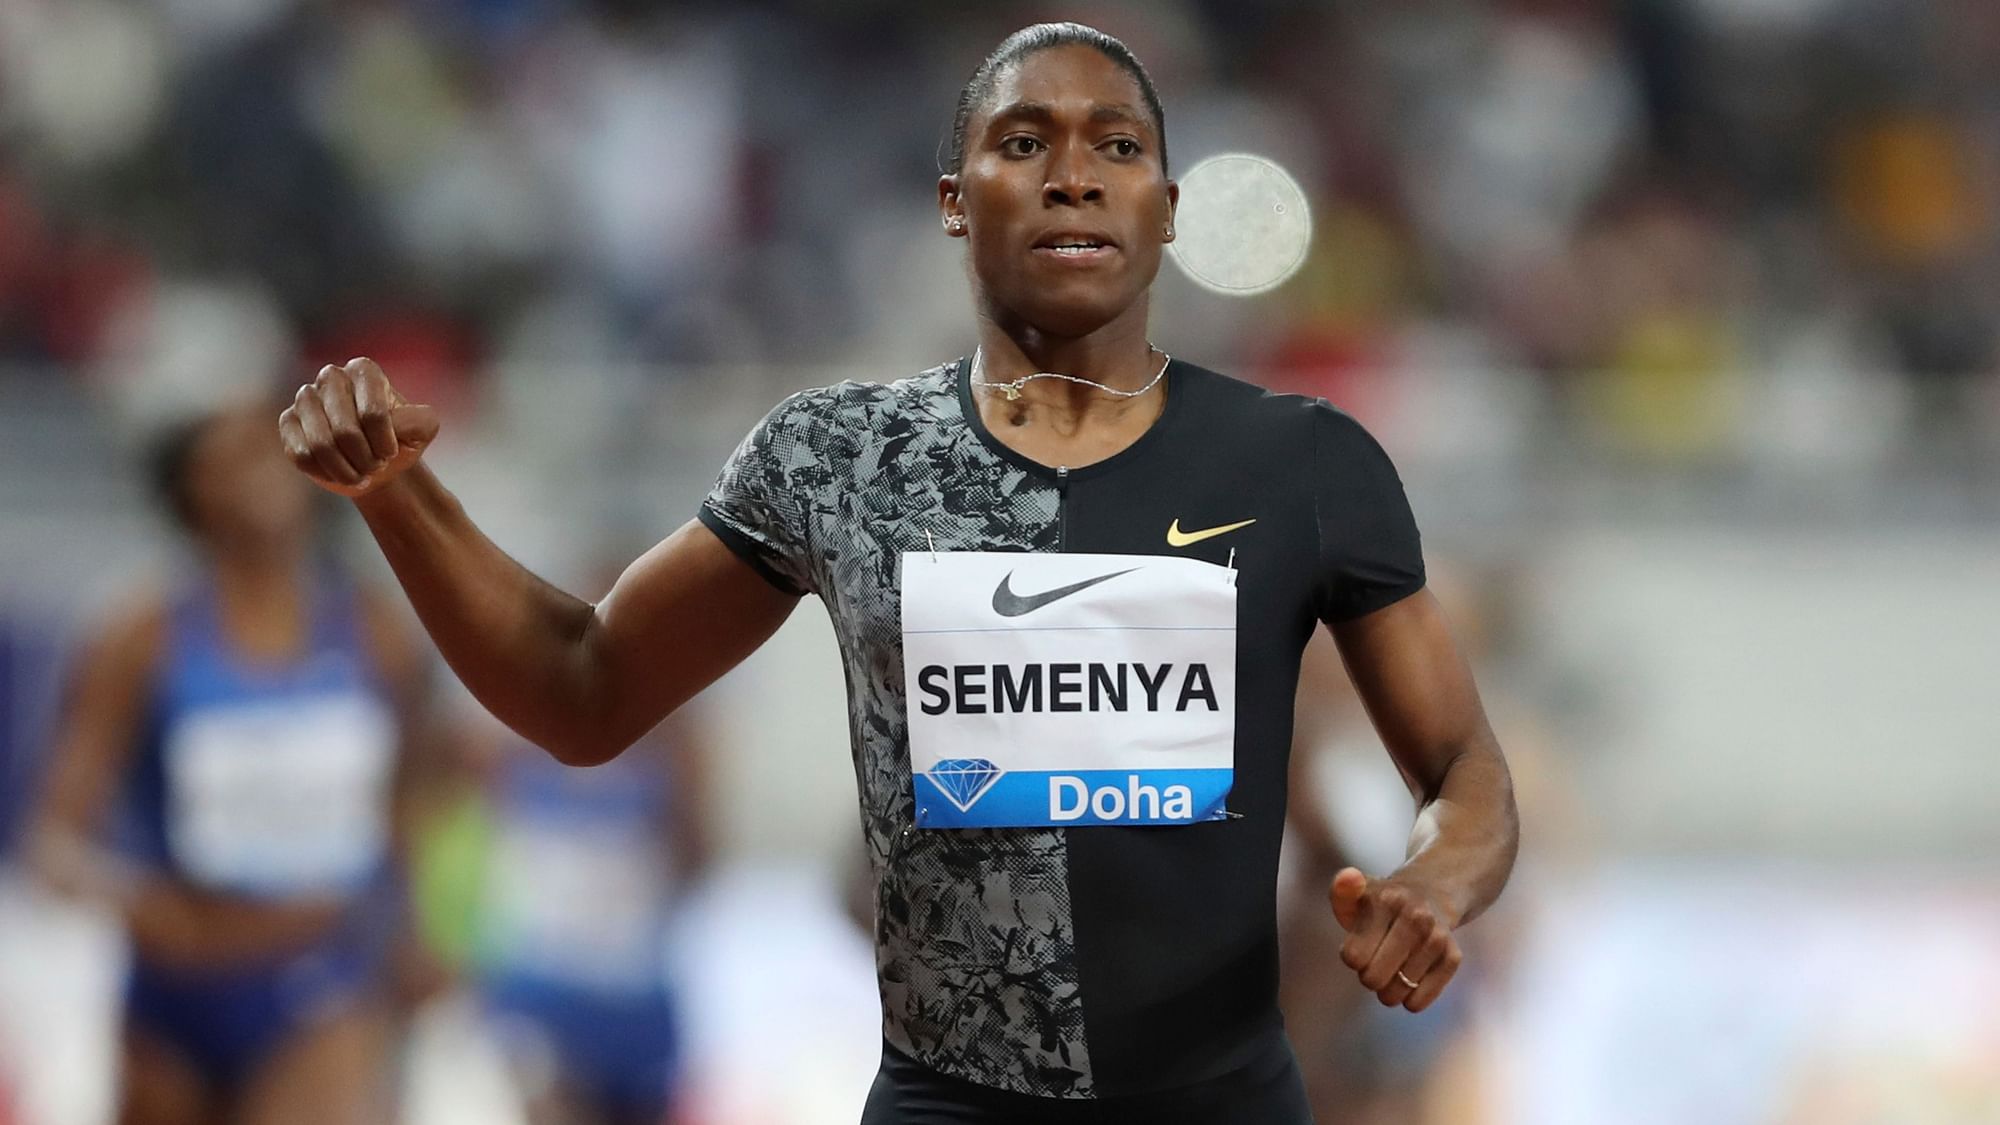 Semenya is locked in a court battle with the IAAF over rules that require her to take drugs to counter her naturally high testosterone levels.